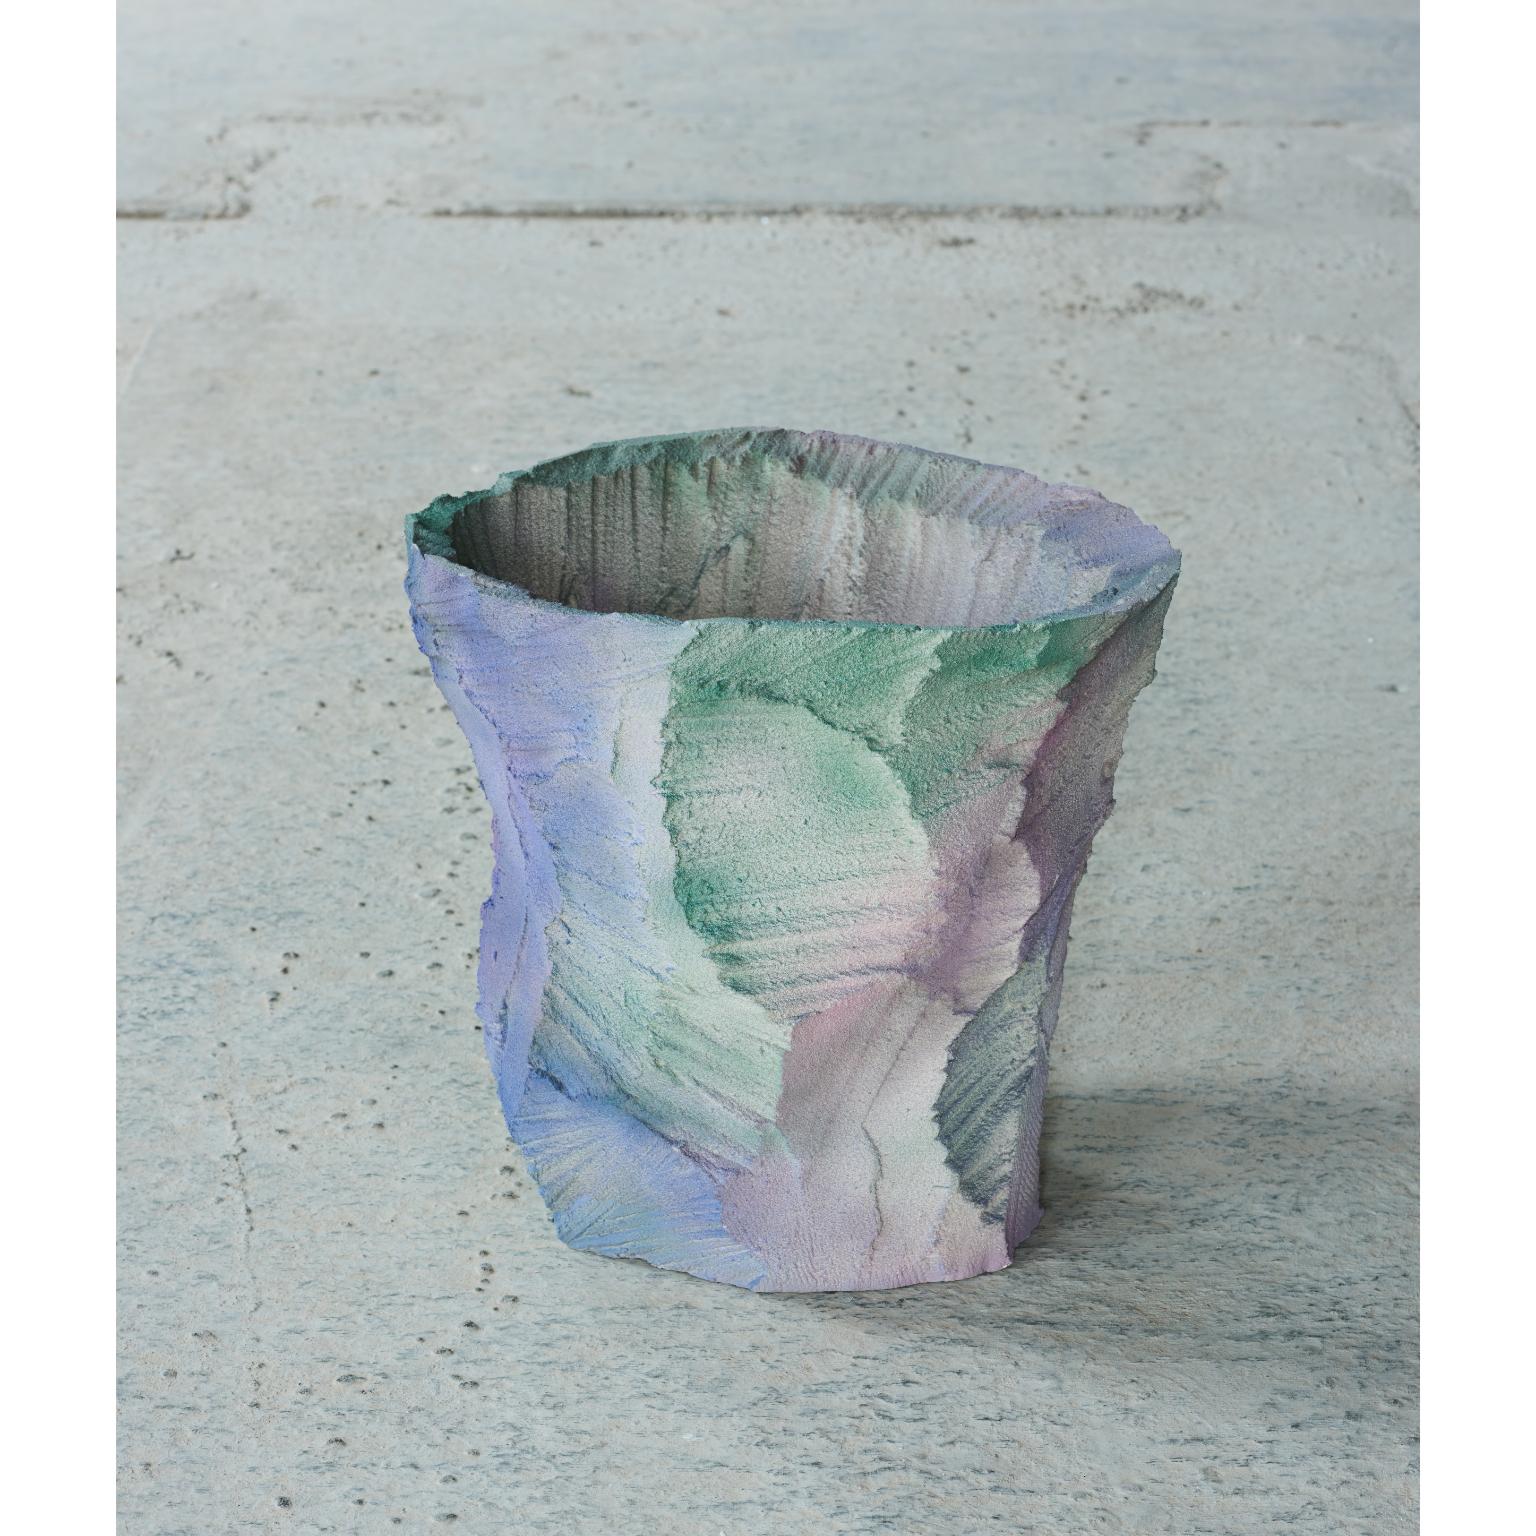 Mineral layer vase by Andredottir & Bobek
Dimensions: W 60 x H 45 cm
Materials: Reused foam/mattress and jesmontite hardner in color green, purple, pink fade.

Artificial Nature is a collaboration between the artist and design duo Josephine